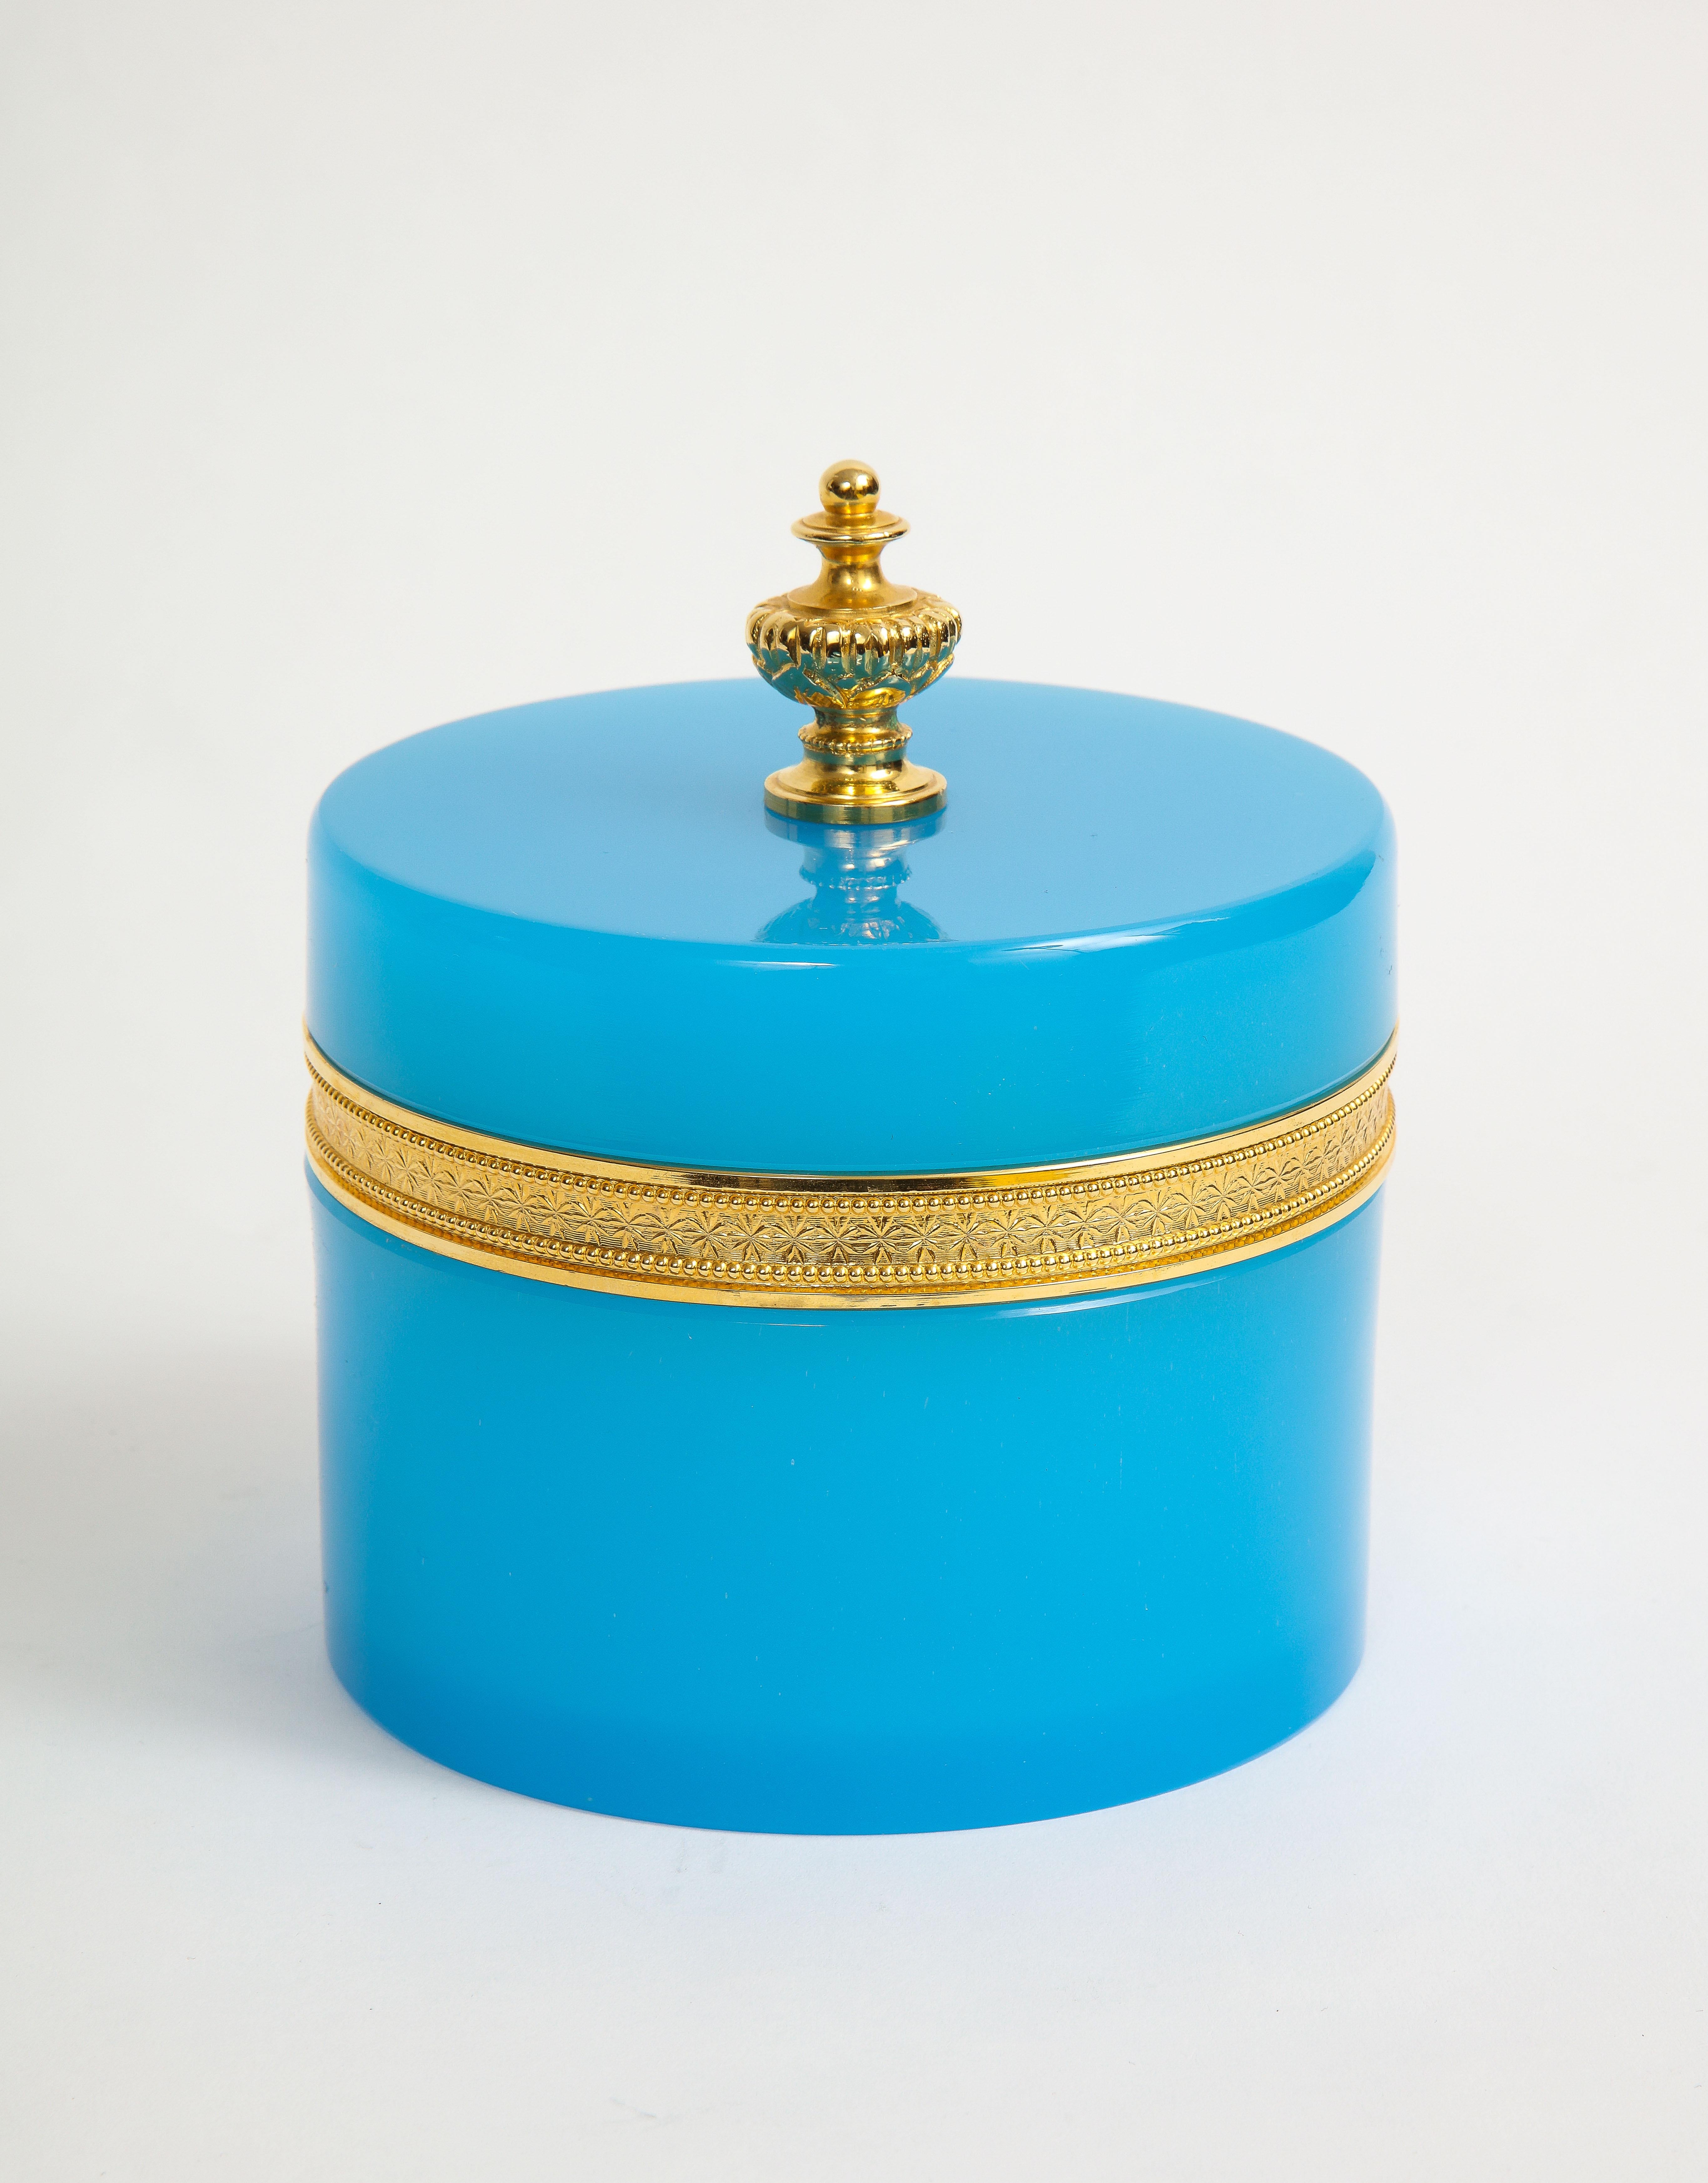 A French dore bronze mounted blue opalescent and dore bronze finial covered box. This round form box is very unusual with a blue opalescent color and dore bronze mount. The top is fitted with a dore bronze finial with is connected from the inside